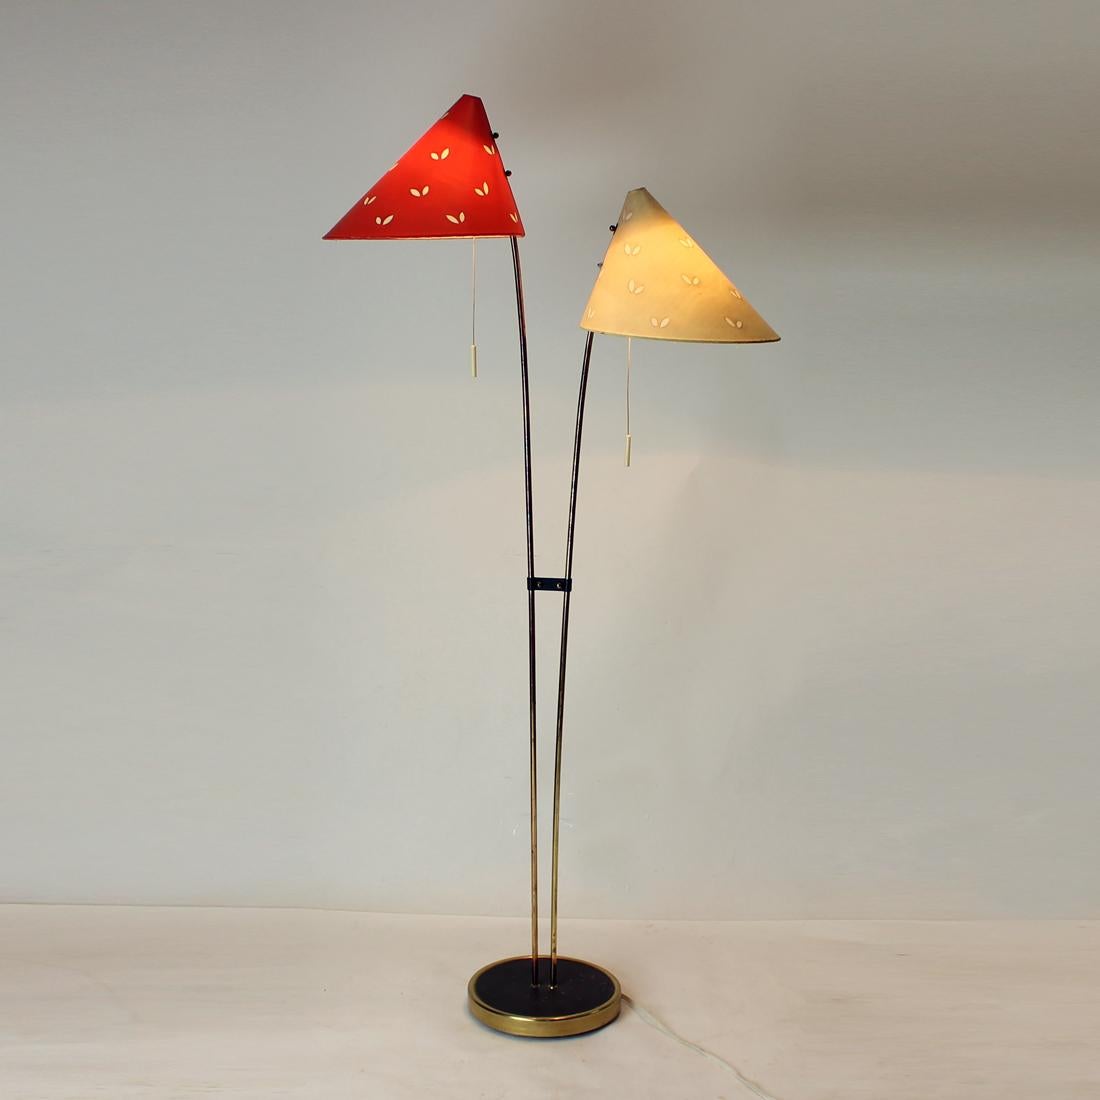 Amazing floor lamp in a great condition! This lamp was produced in Czechoslovakia in 1960s by Zukov. Stands on a strong brass construction and rods. The brass shows only minor age fading. the lamp has two original shields in red and cream shade of